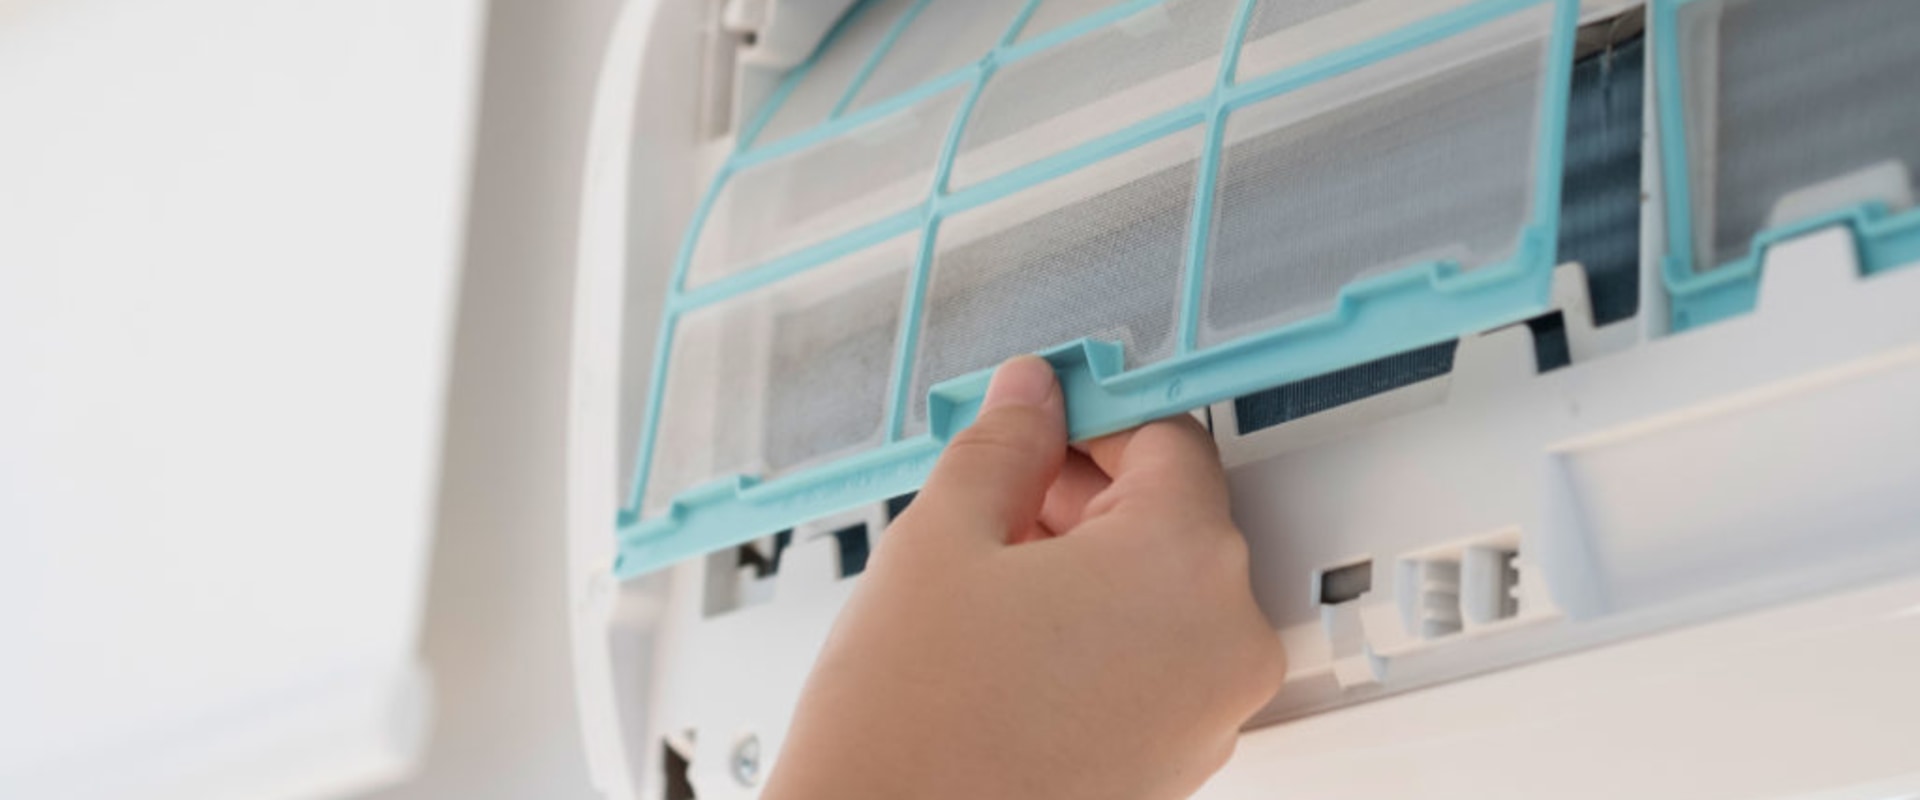 Maintaining Indoor Air Quality With Clean Filters